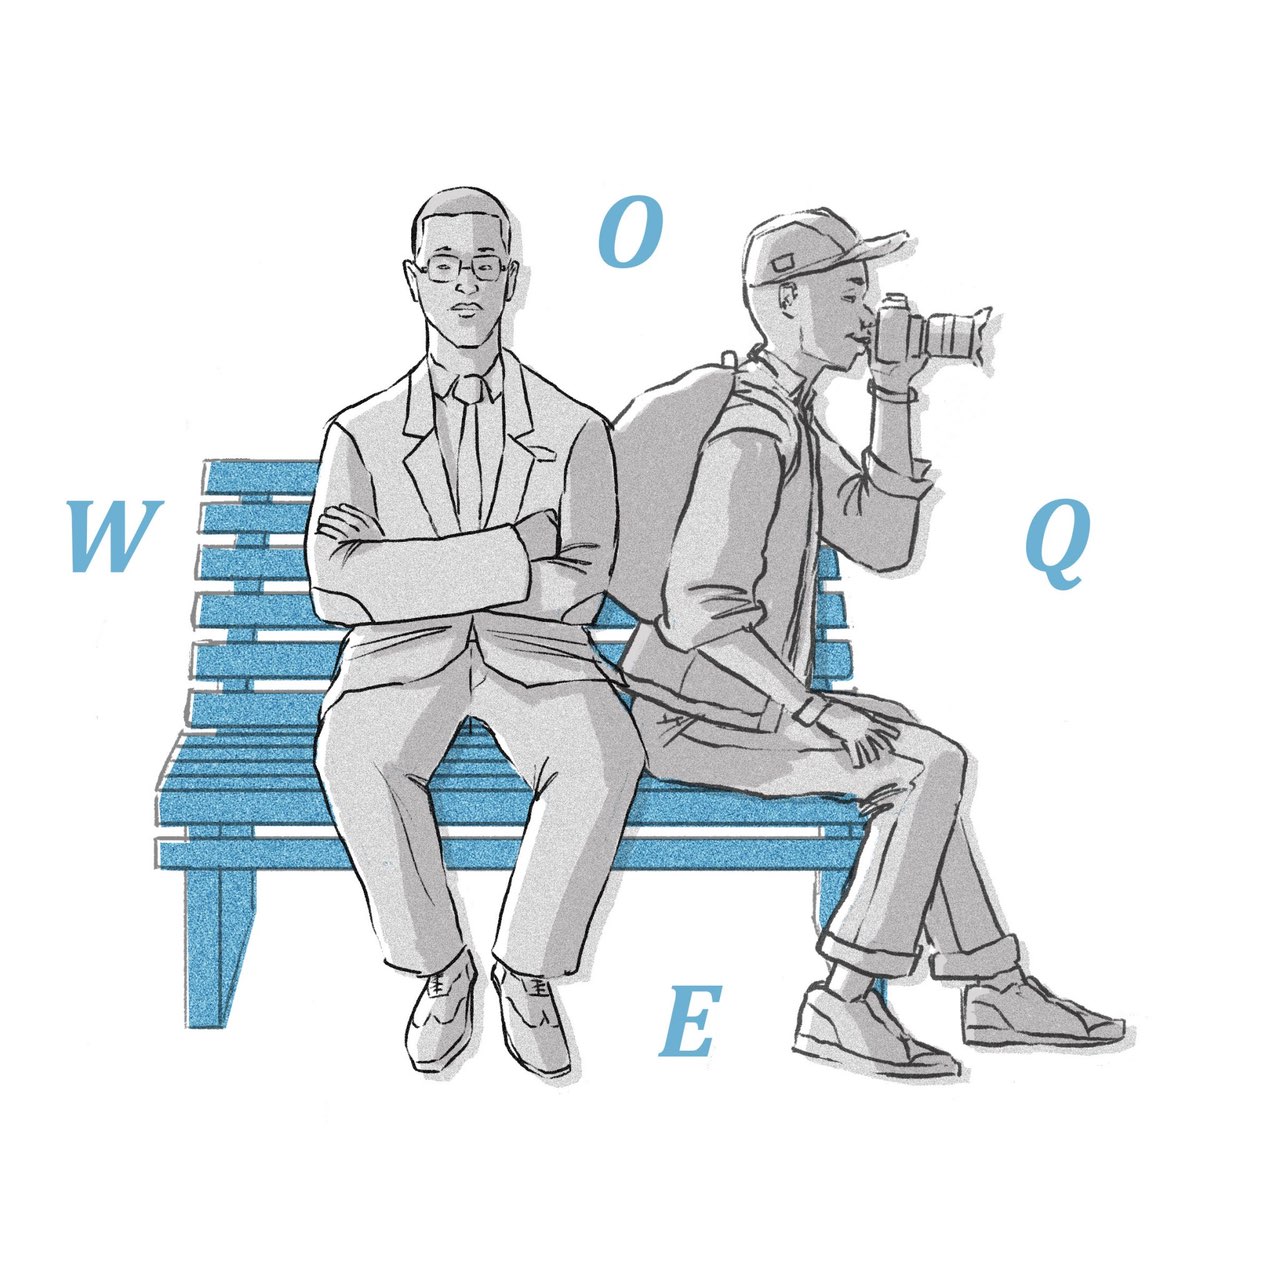 Two people sit on a bench, one in a suit with arms crossed and the other wearing a backpack while looking through a camera. The letters WOQE surround them.